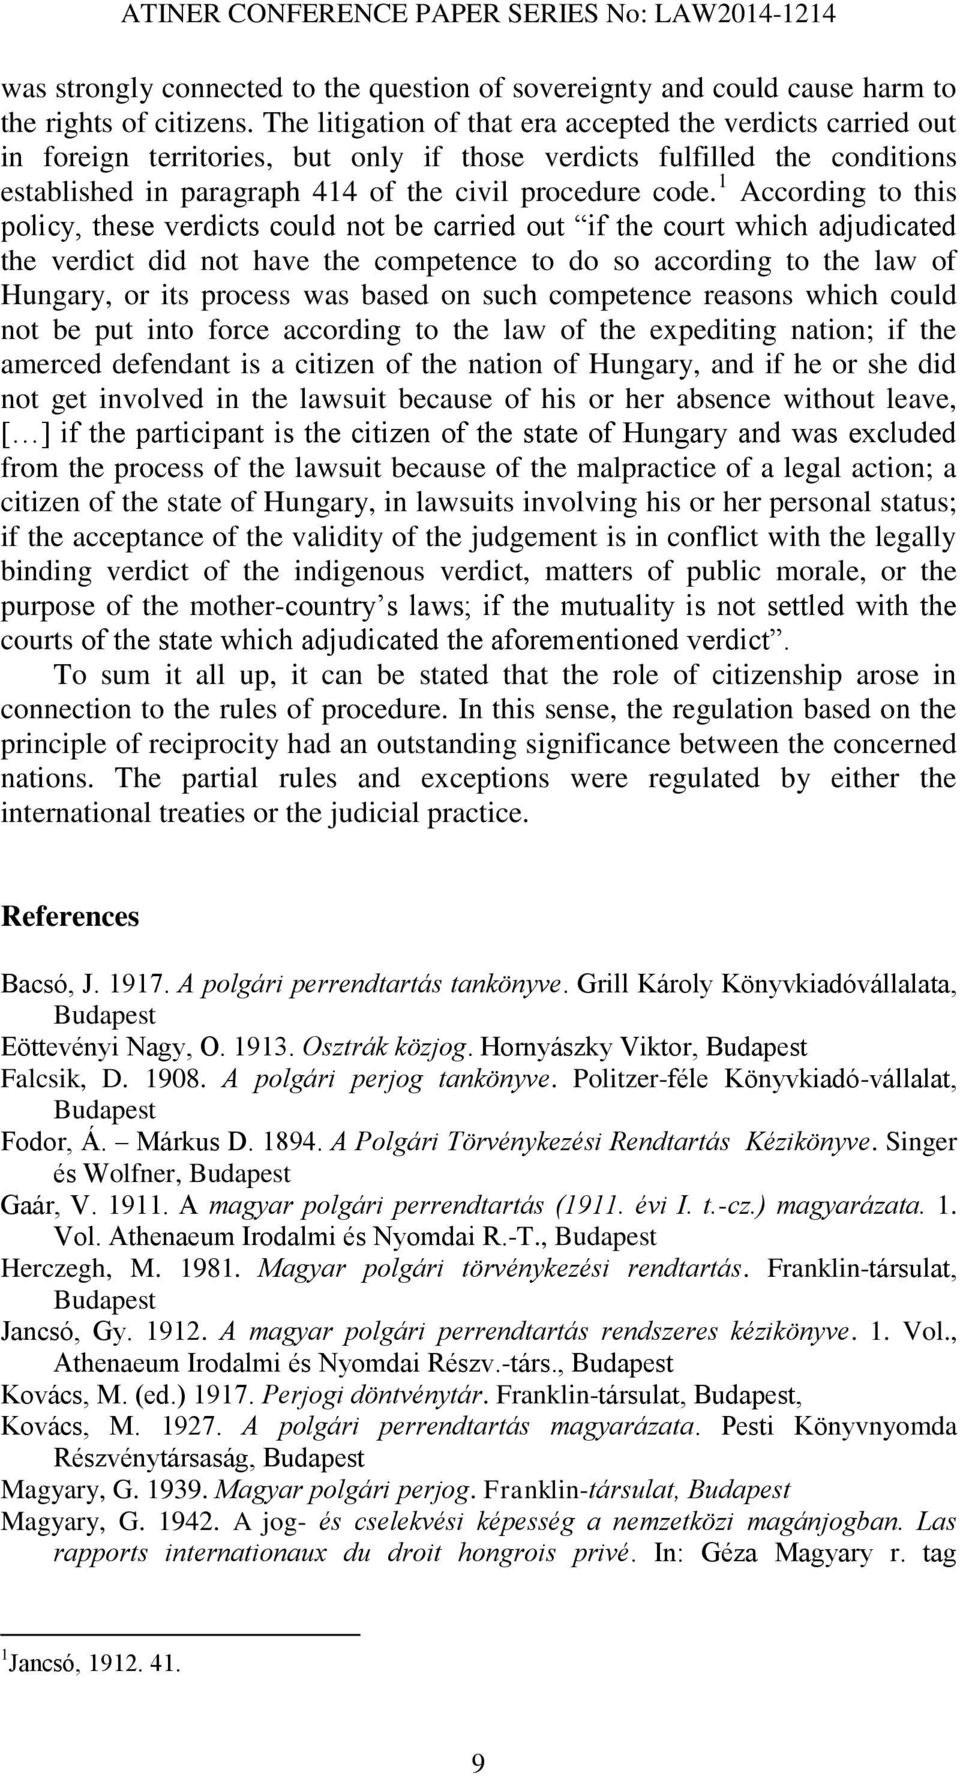 1 According to this policy, these verdicts could not be carried out if the court which adjudicated the verdict did not have the competence to do so according to the law of Hungary, or its process was